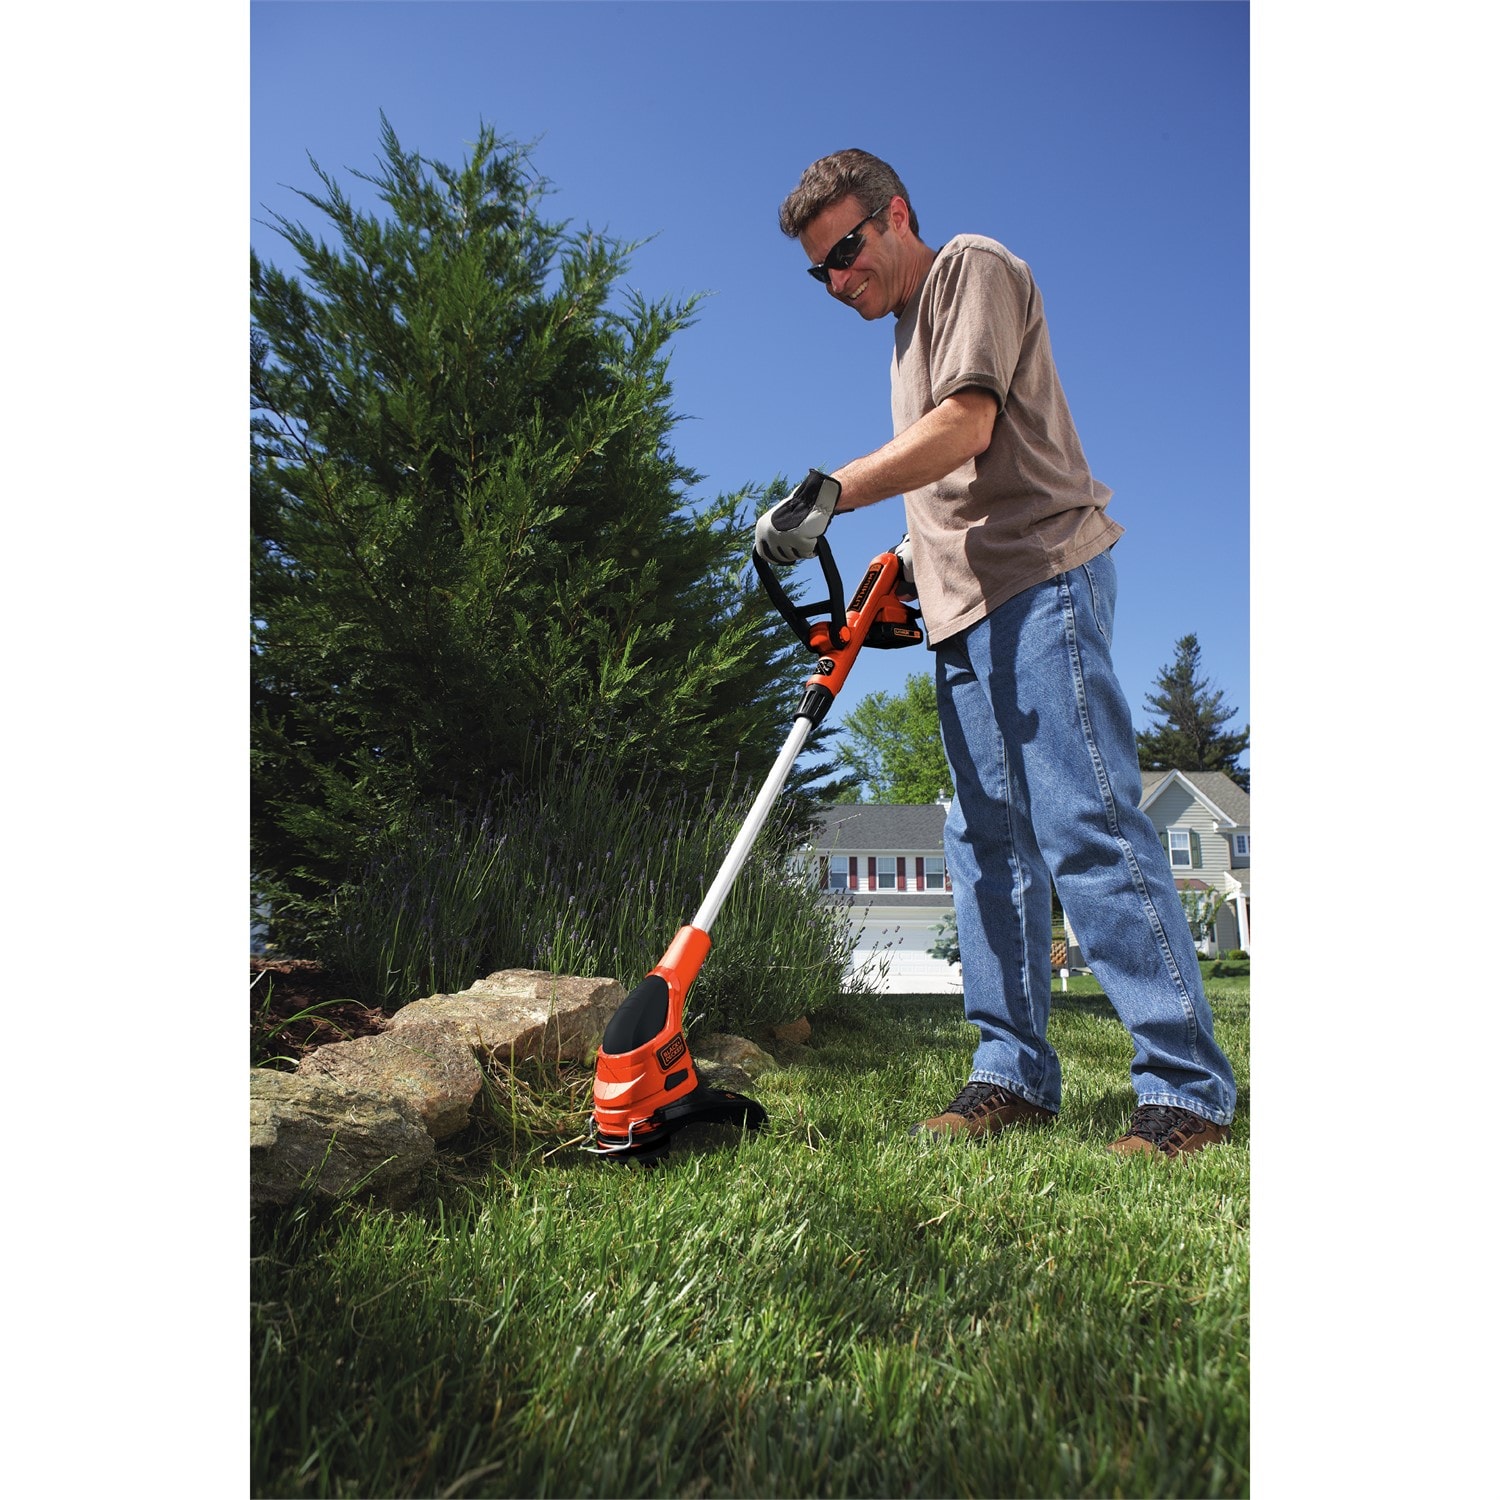 Black+Decker LST220 String Trimmer Review - Consumer Reports